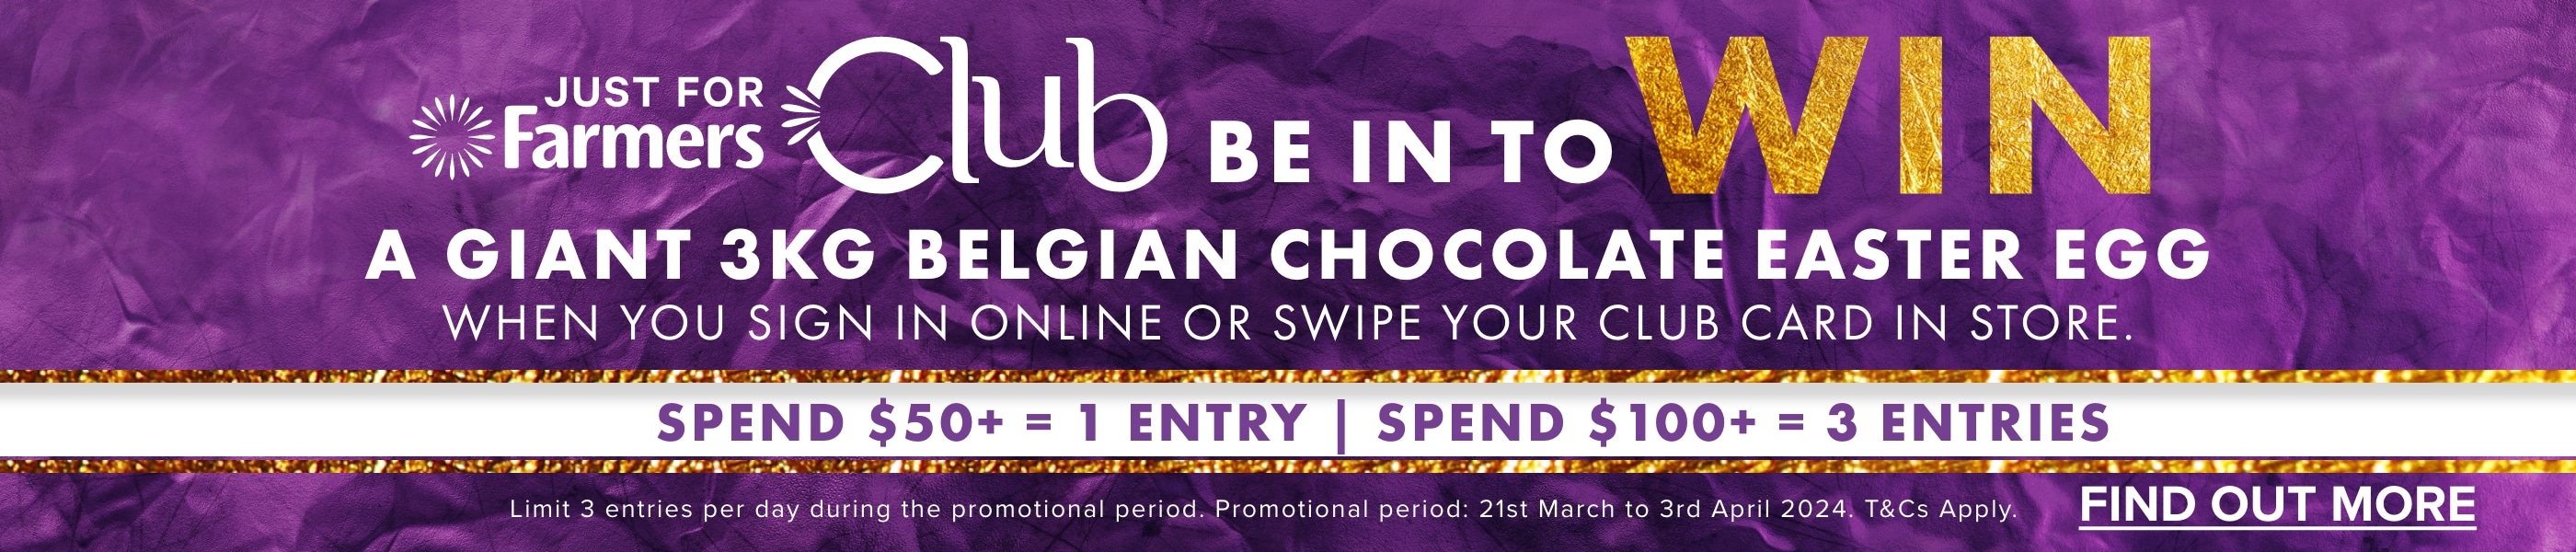 Be In To Win a Giant 3KG Belgian Chocolate Easter Egg | Find Out More 